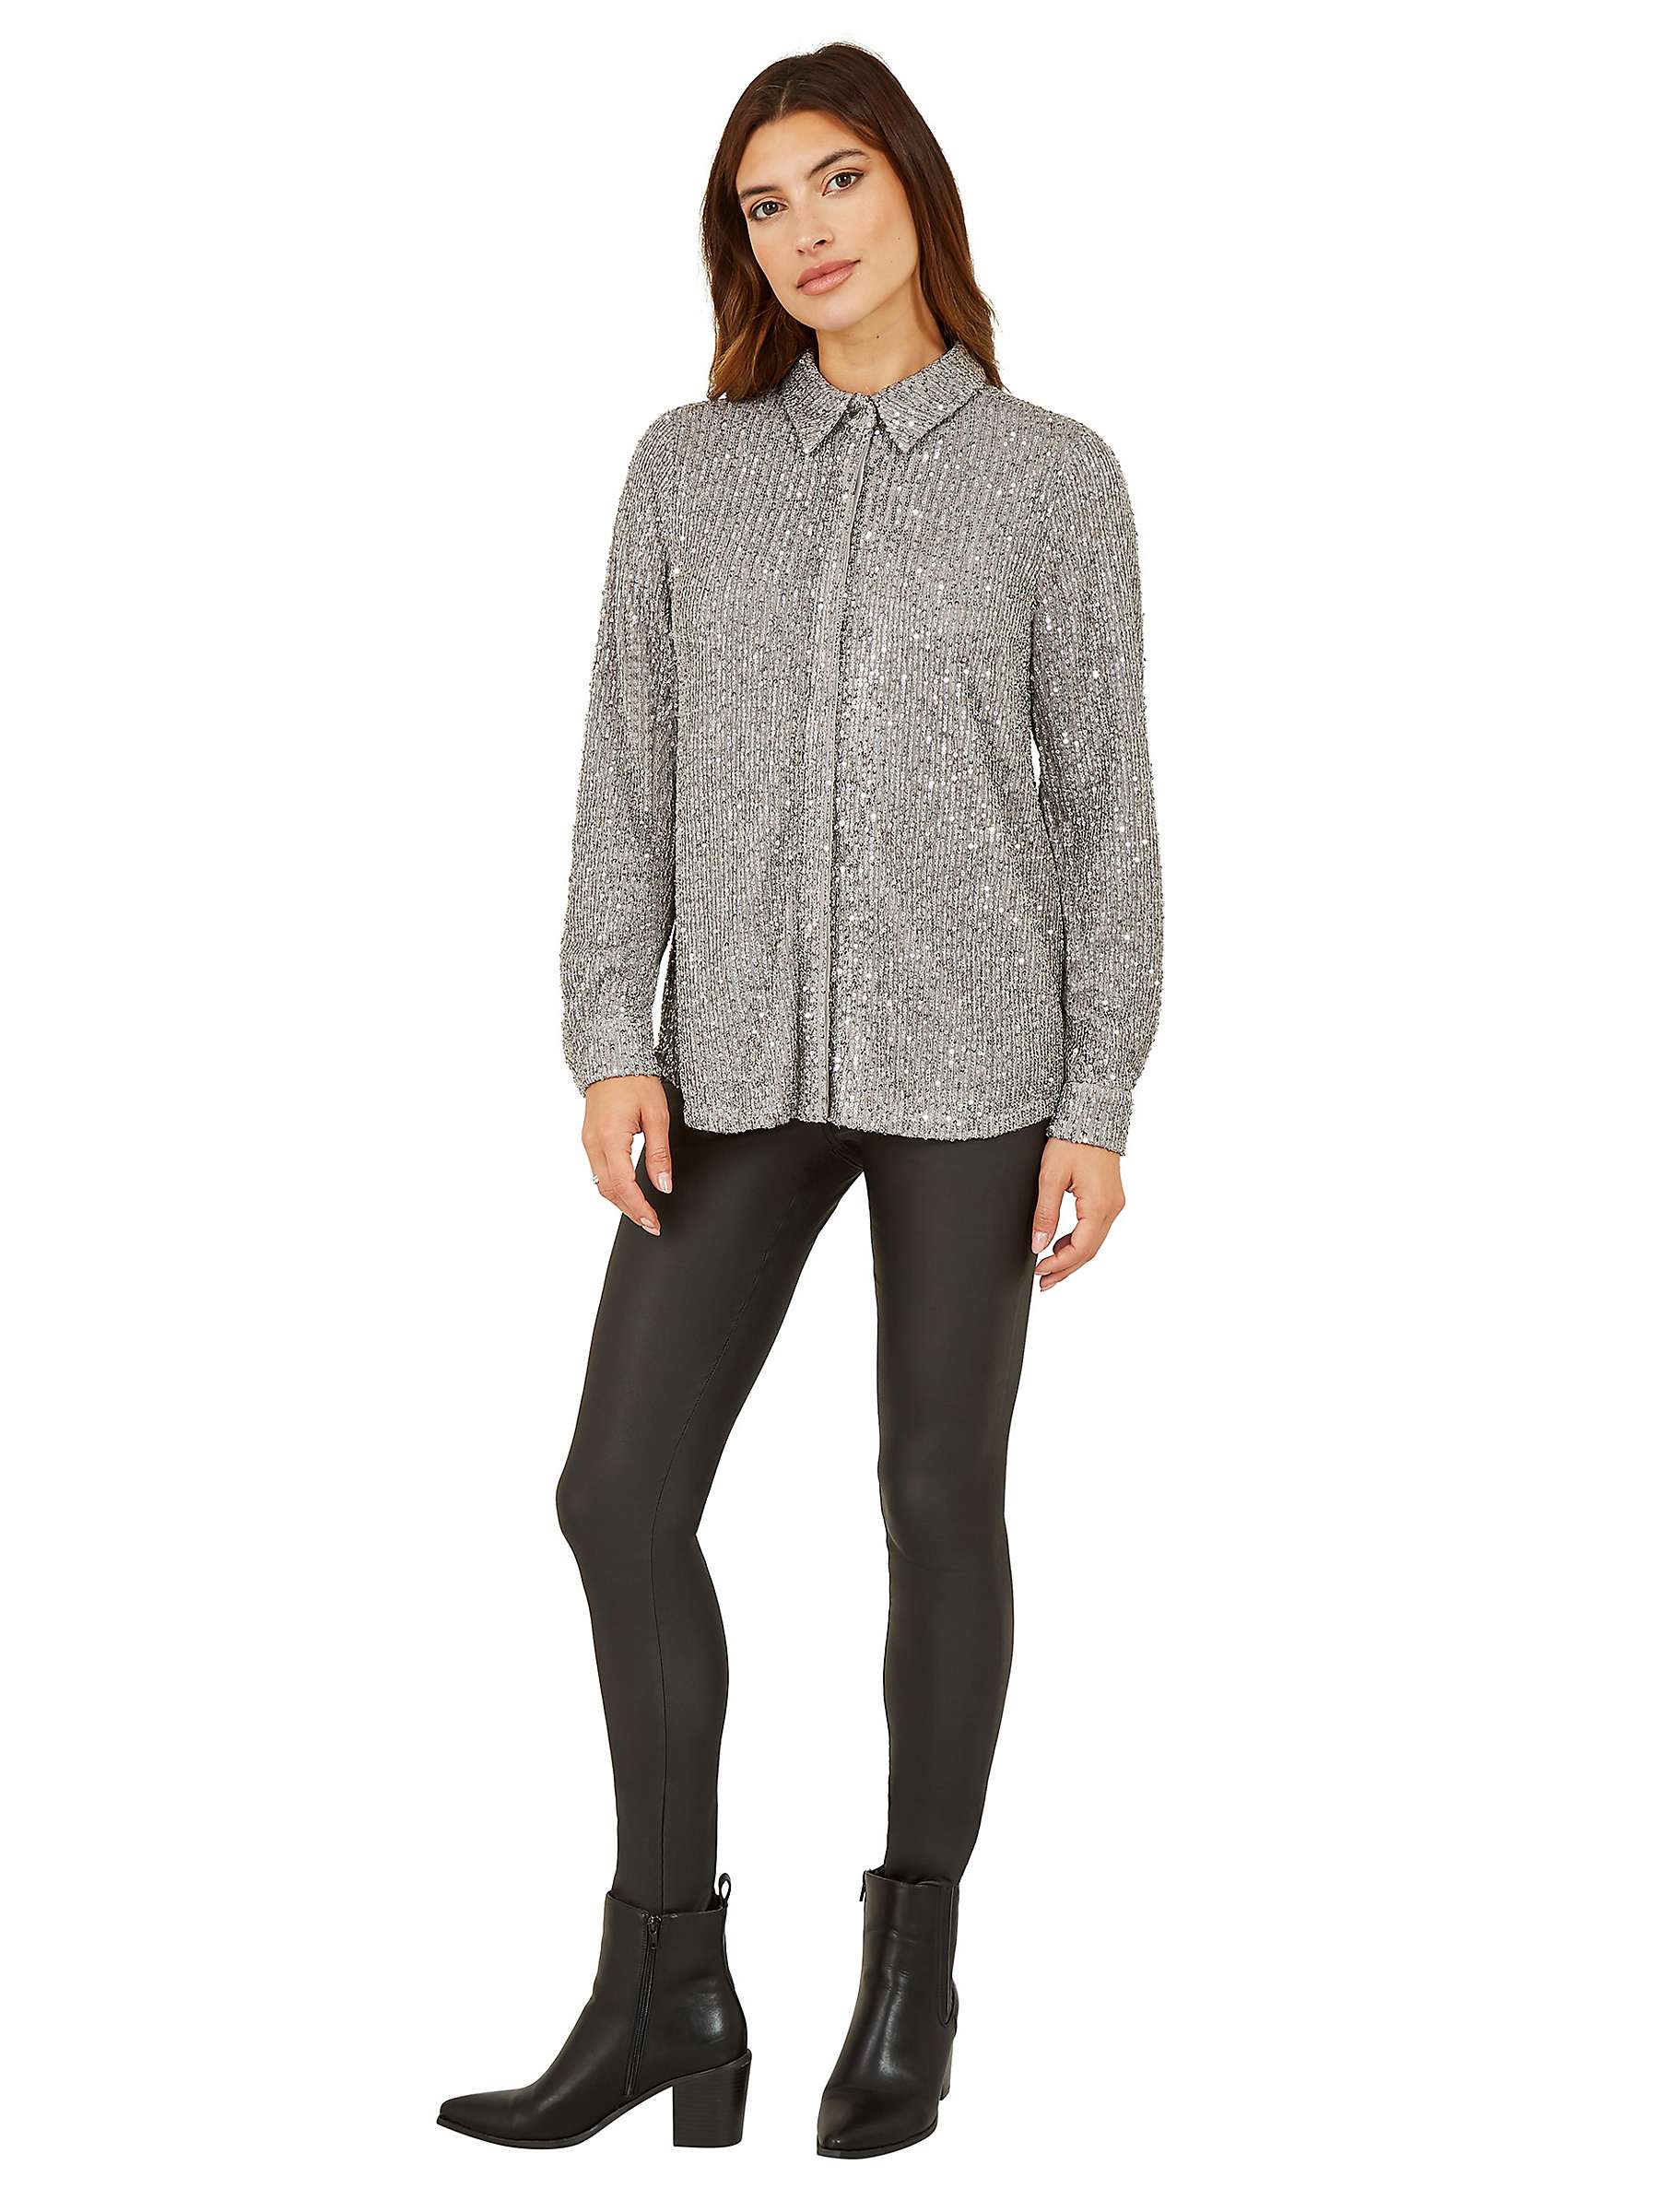 Buy Yumi Silver Sequin Shirt Online at johnlewis.com